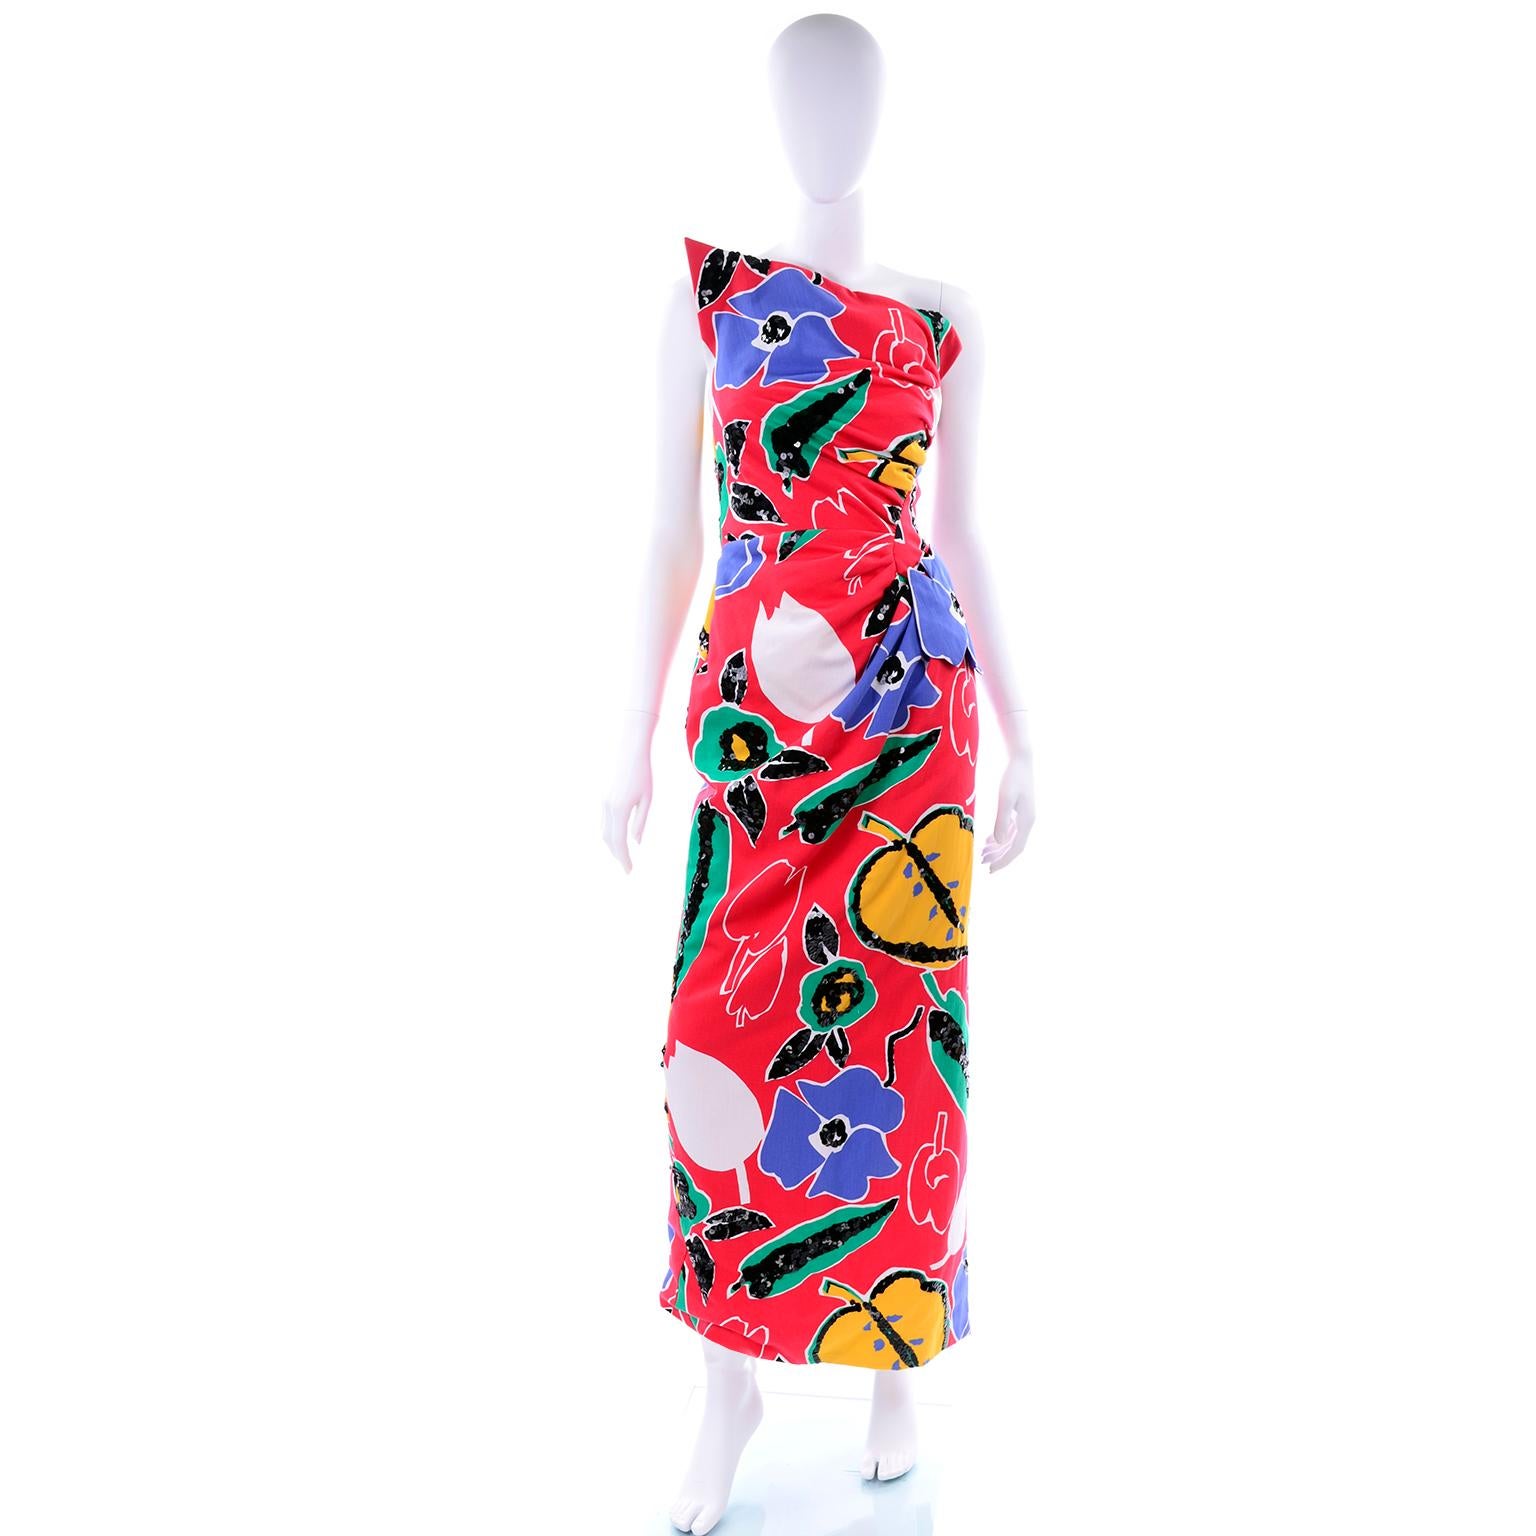 This is a stunning vintage evening dress from Arnold Scaasi in a gorgeous red, blue, yellow, green and white cotton floral print. This Scaasi boutique Summer evening gown is embellished with lovely sequins and we especially love the asymmetrical one